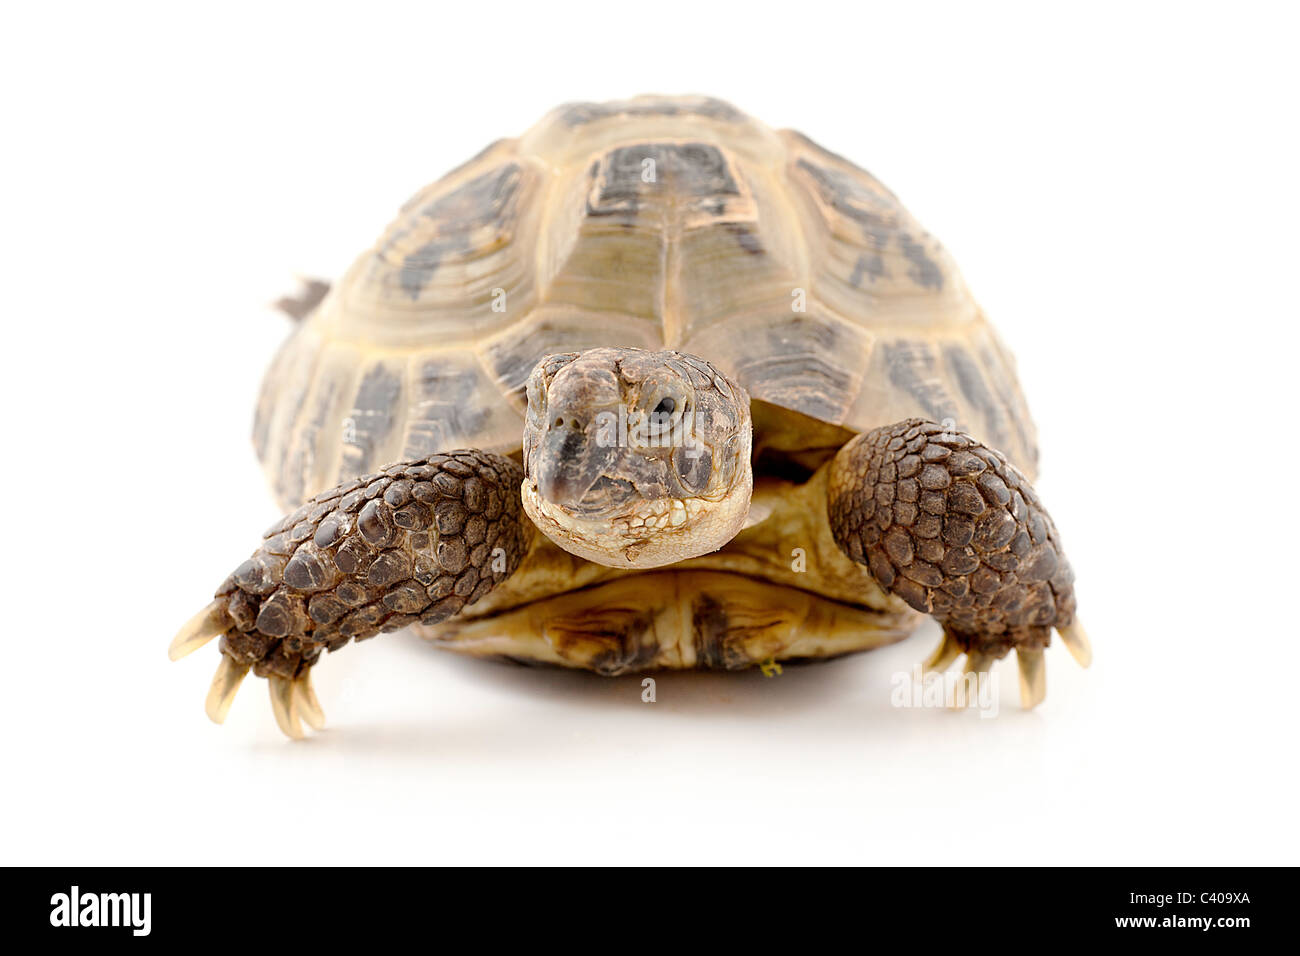 Russian tortoise on a shite background, Focus is shallow Stock Photo